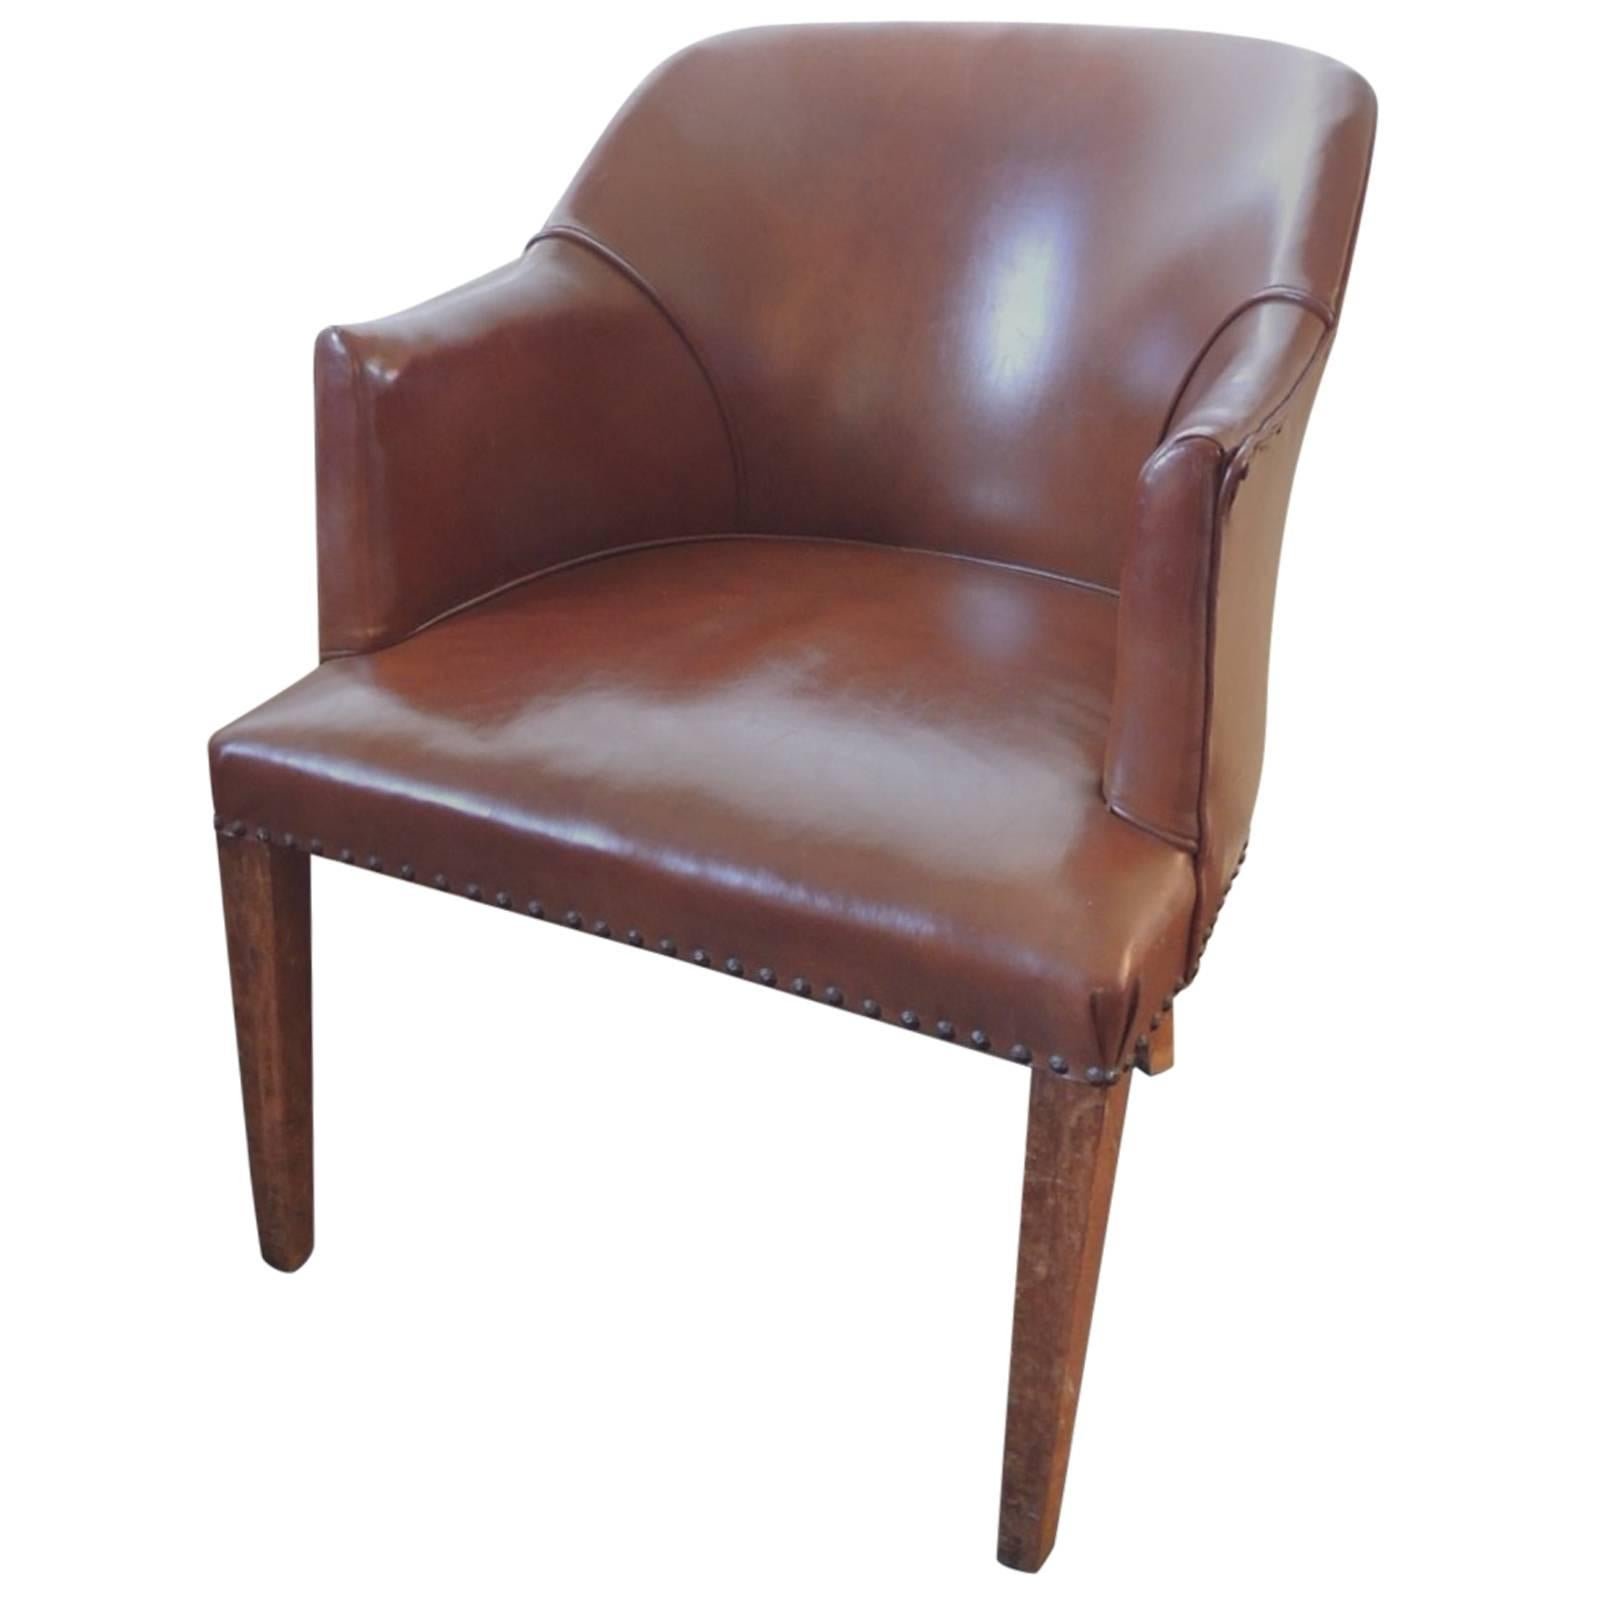 Antique French Leather Armchair with Wood Square Legs